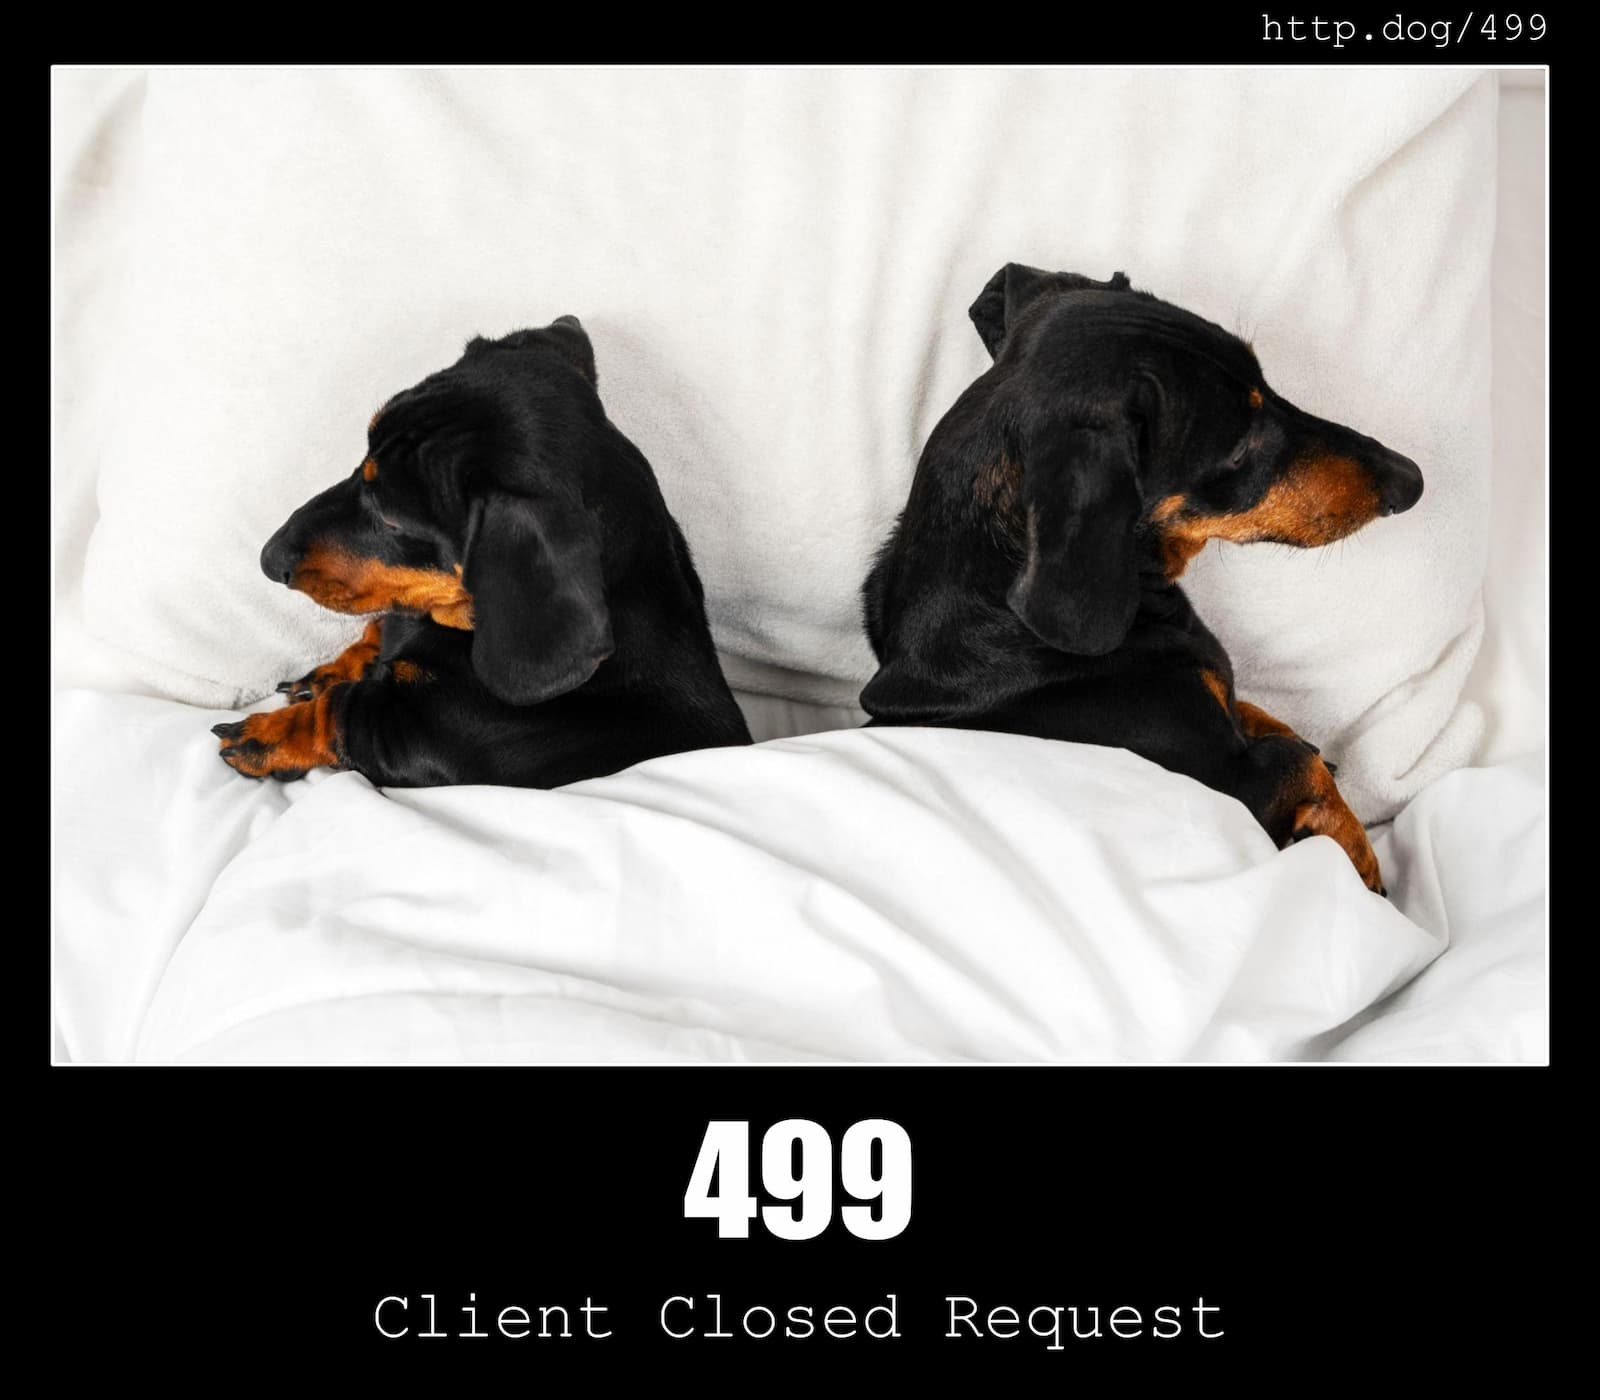 HTTP Status Code 499 Client Closed Request & Dogs